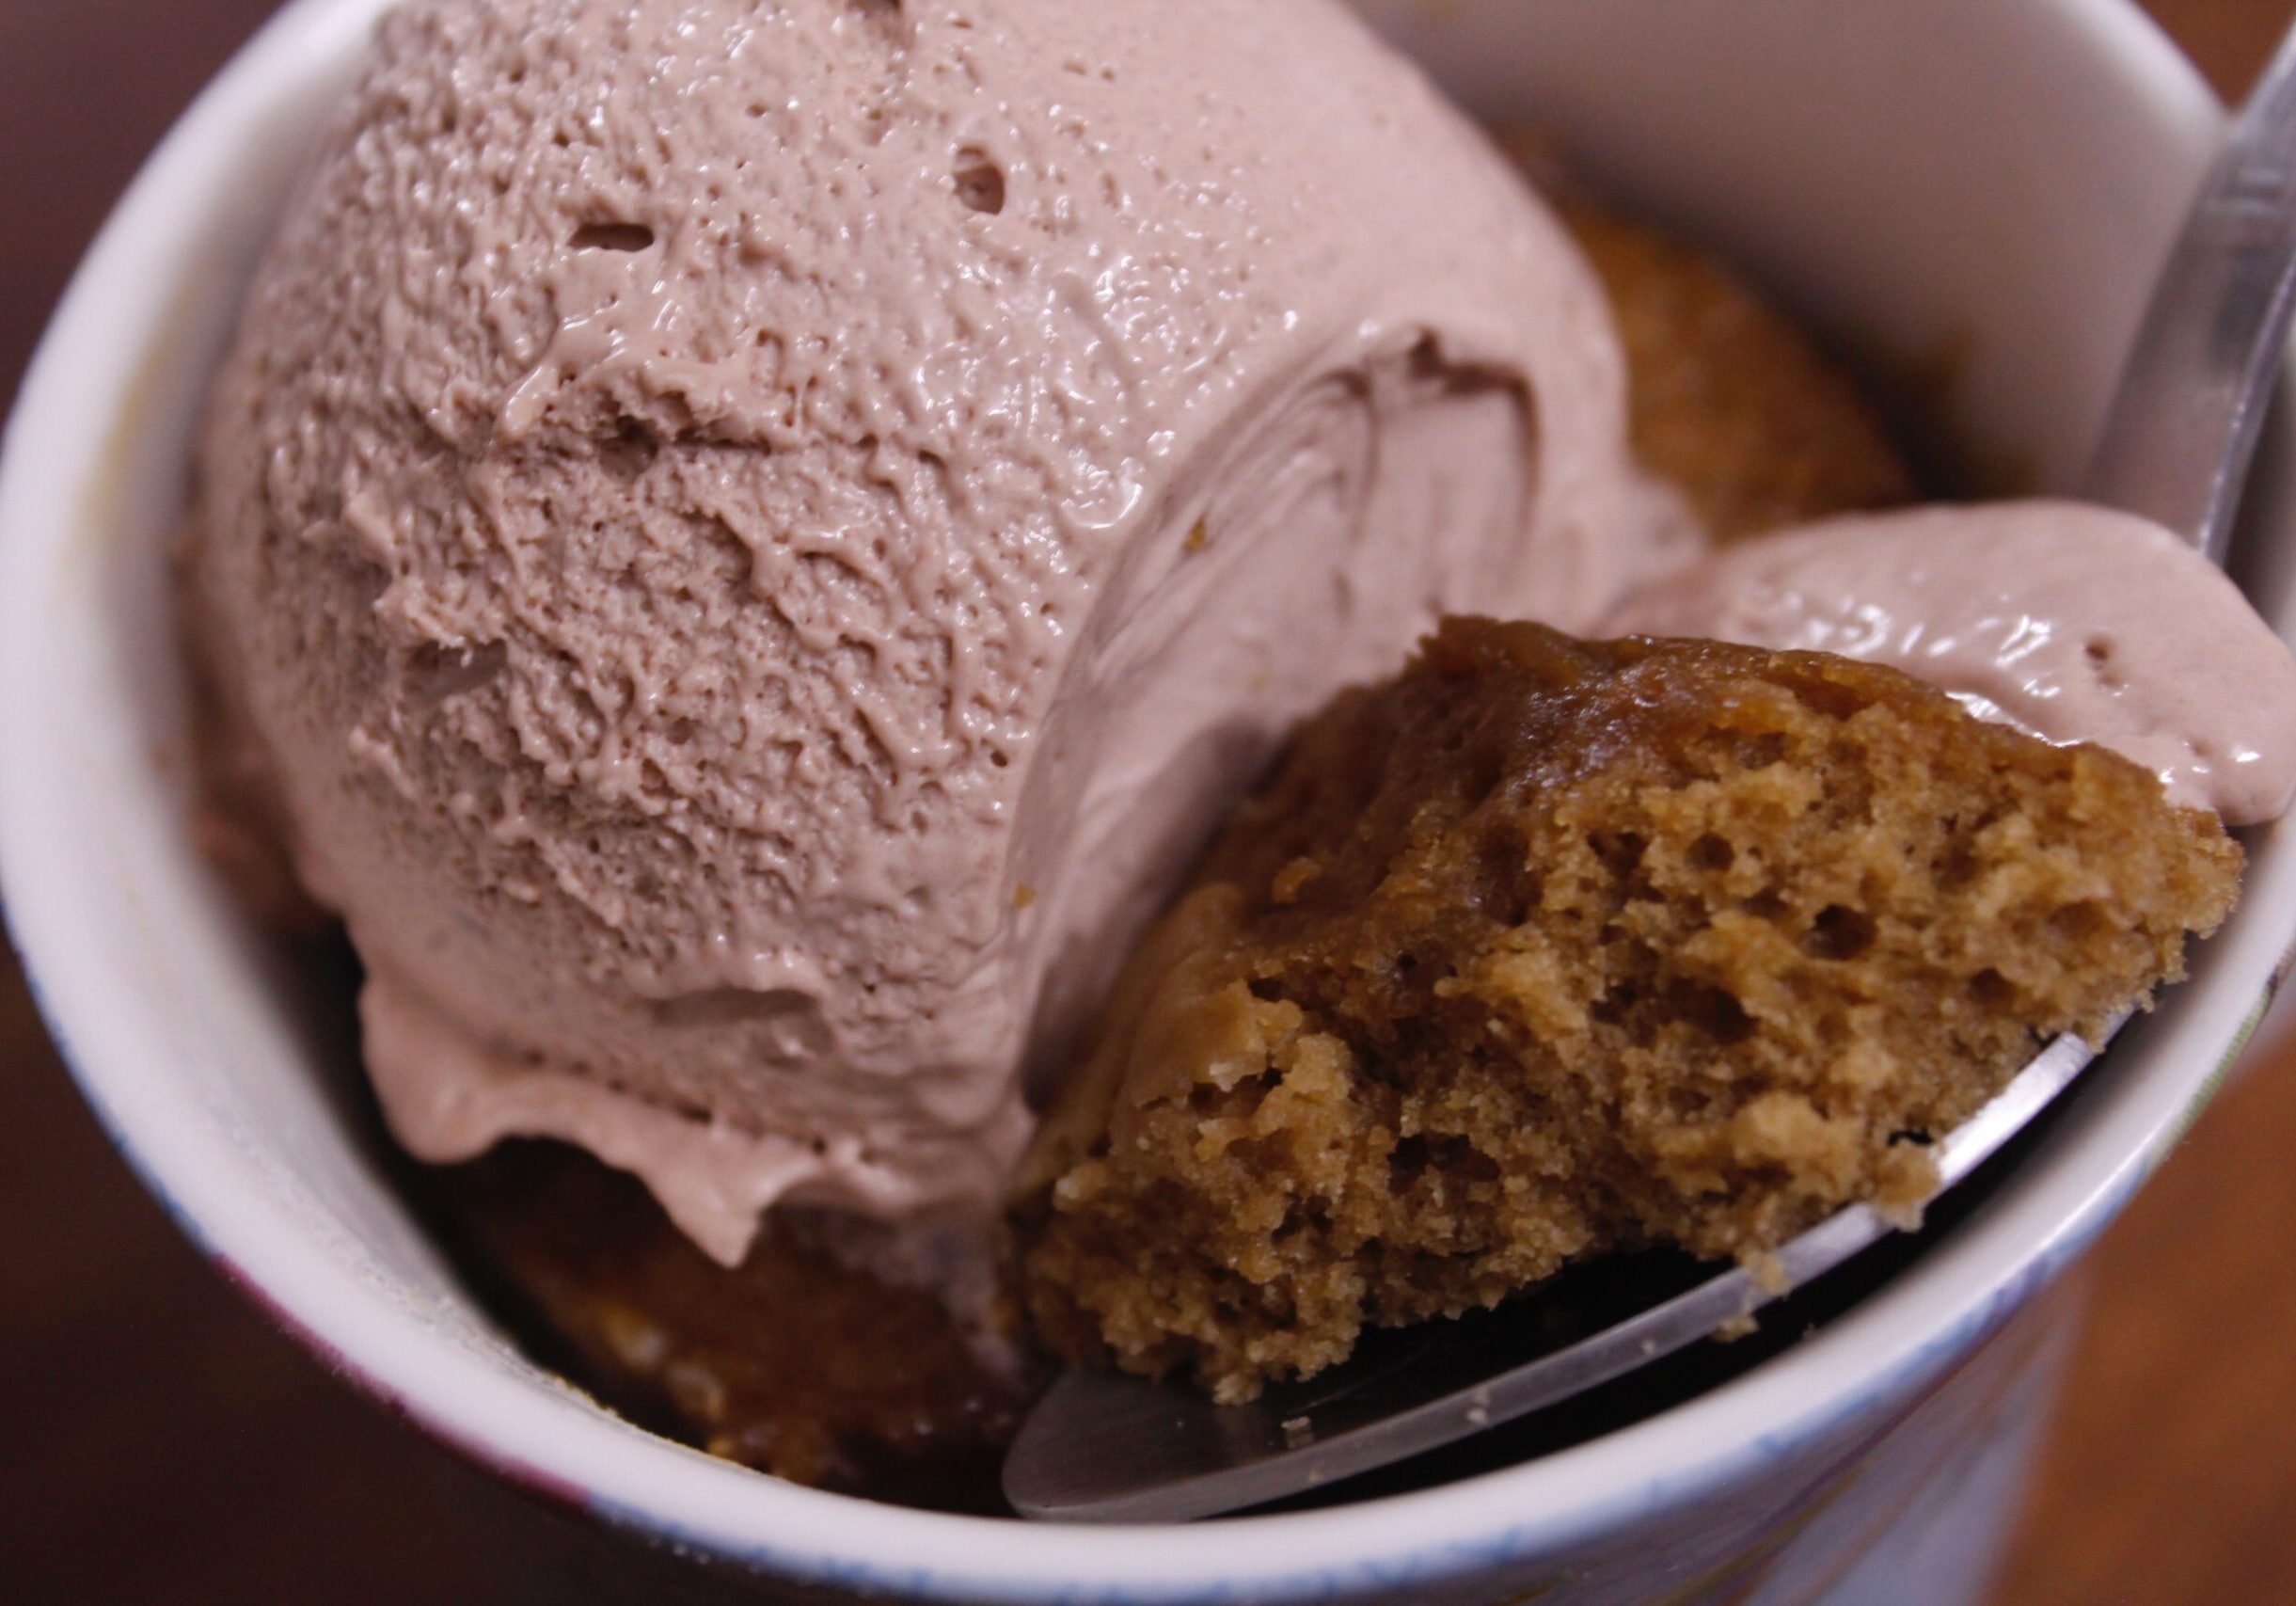 a white bowl containing a scoop of chocolate ice cream and a scoop of strawberry ice cream.